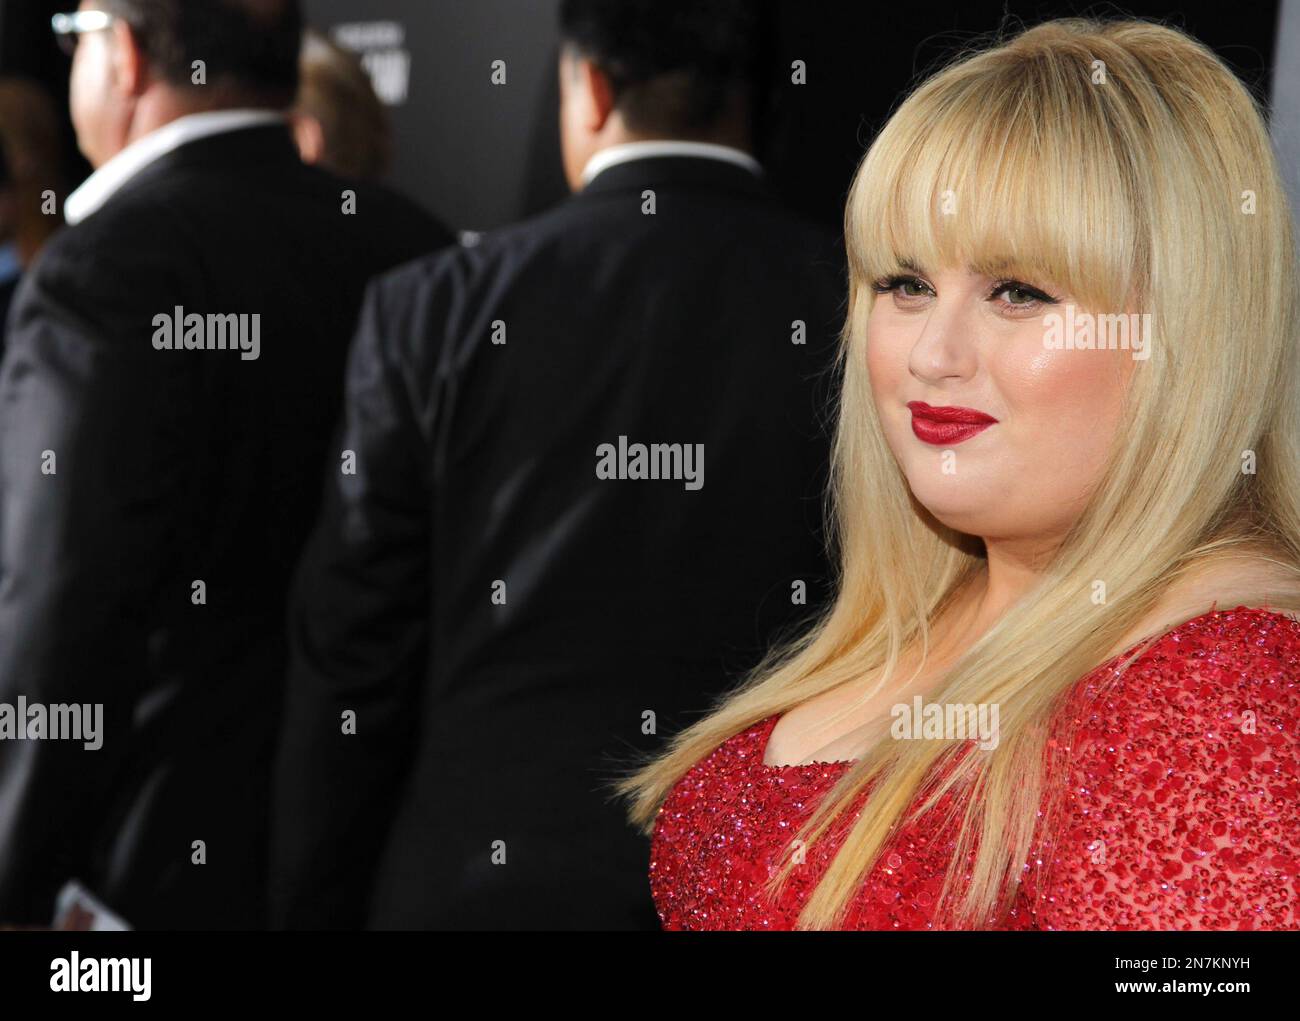 Actress Rebel Wilson arrives at the LA Premiere of 